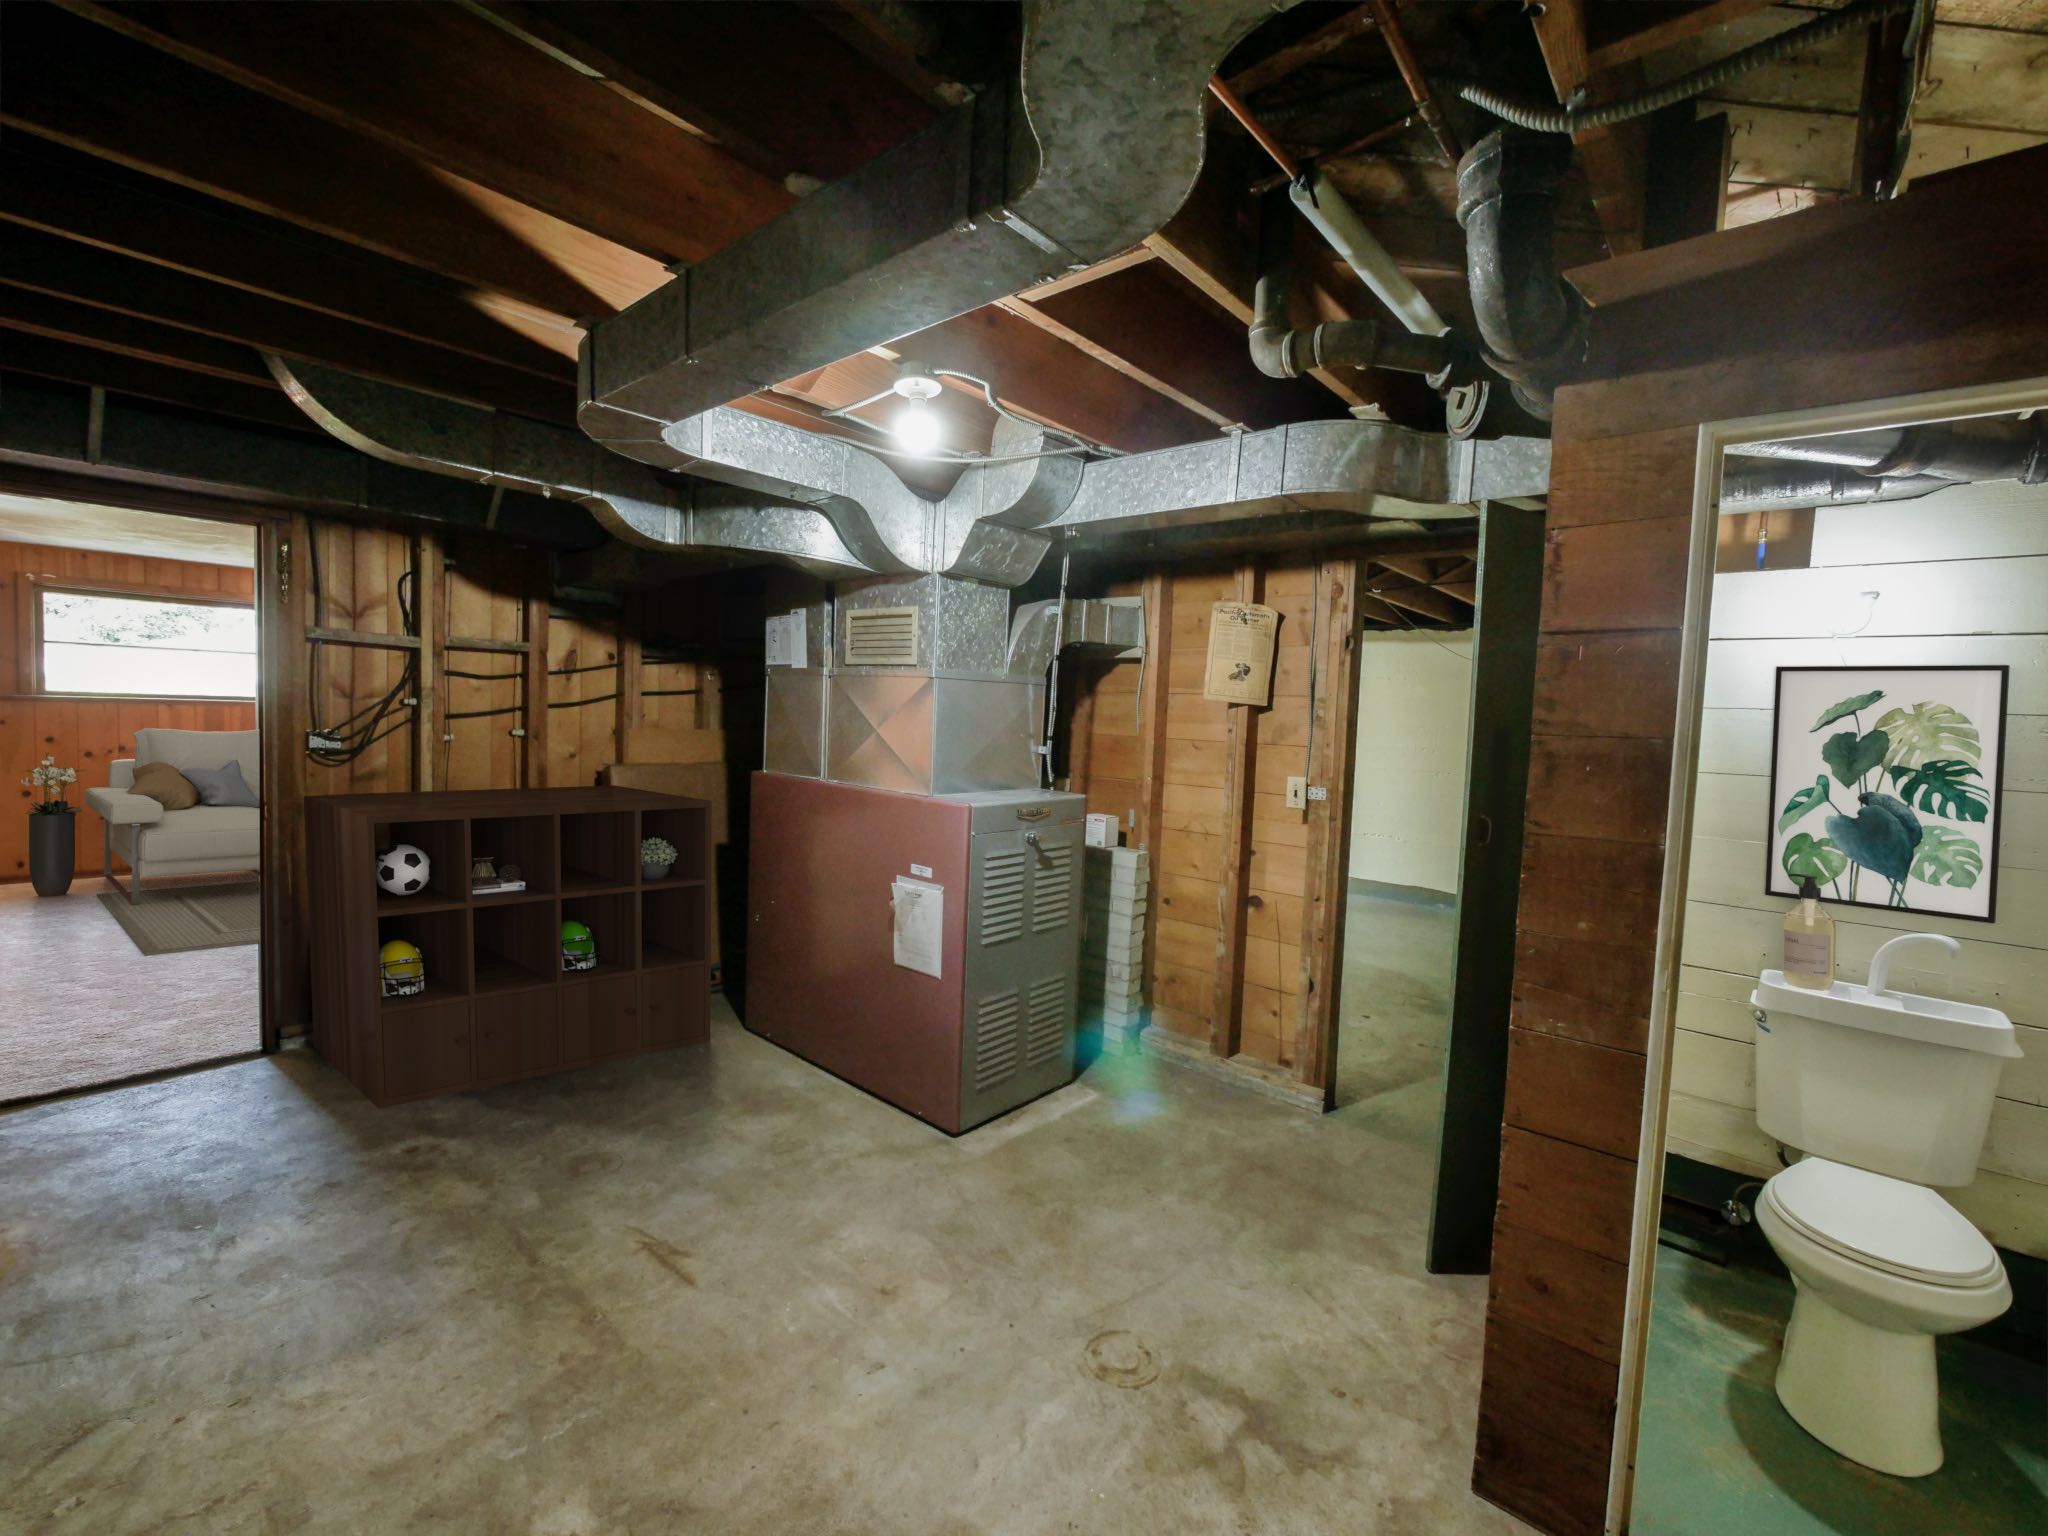 Furnace room with storage and workshop opportunities and tidy .25 Bath on Lower level ready for upgrades.